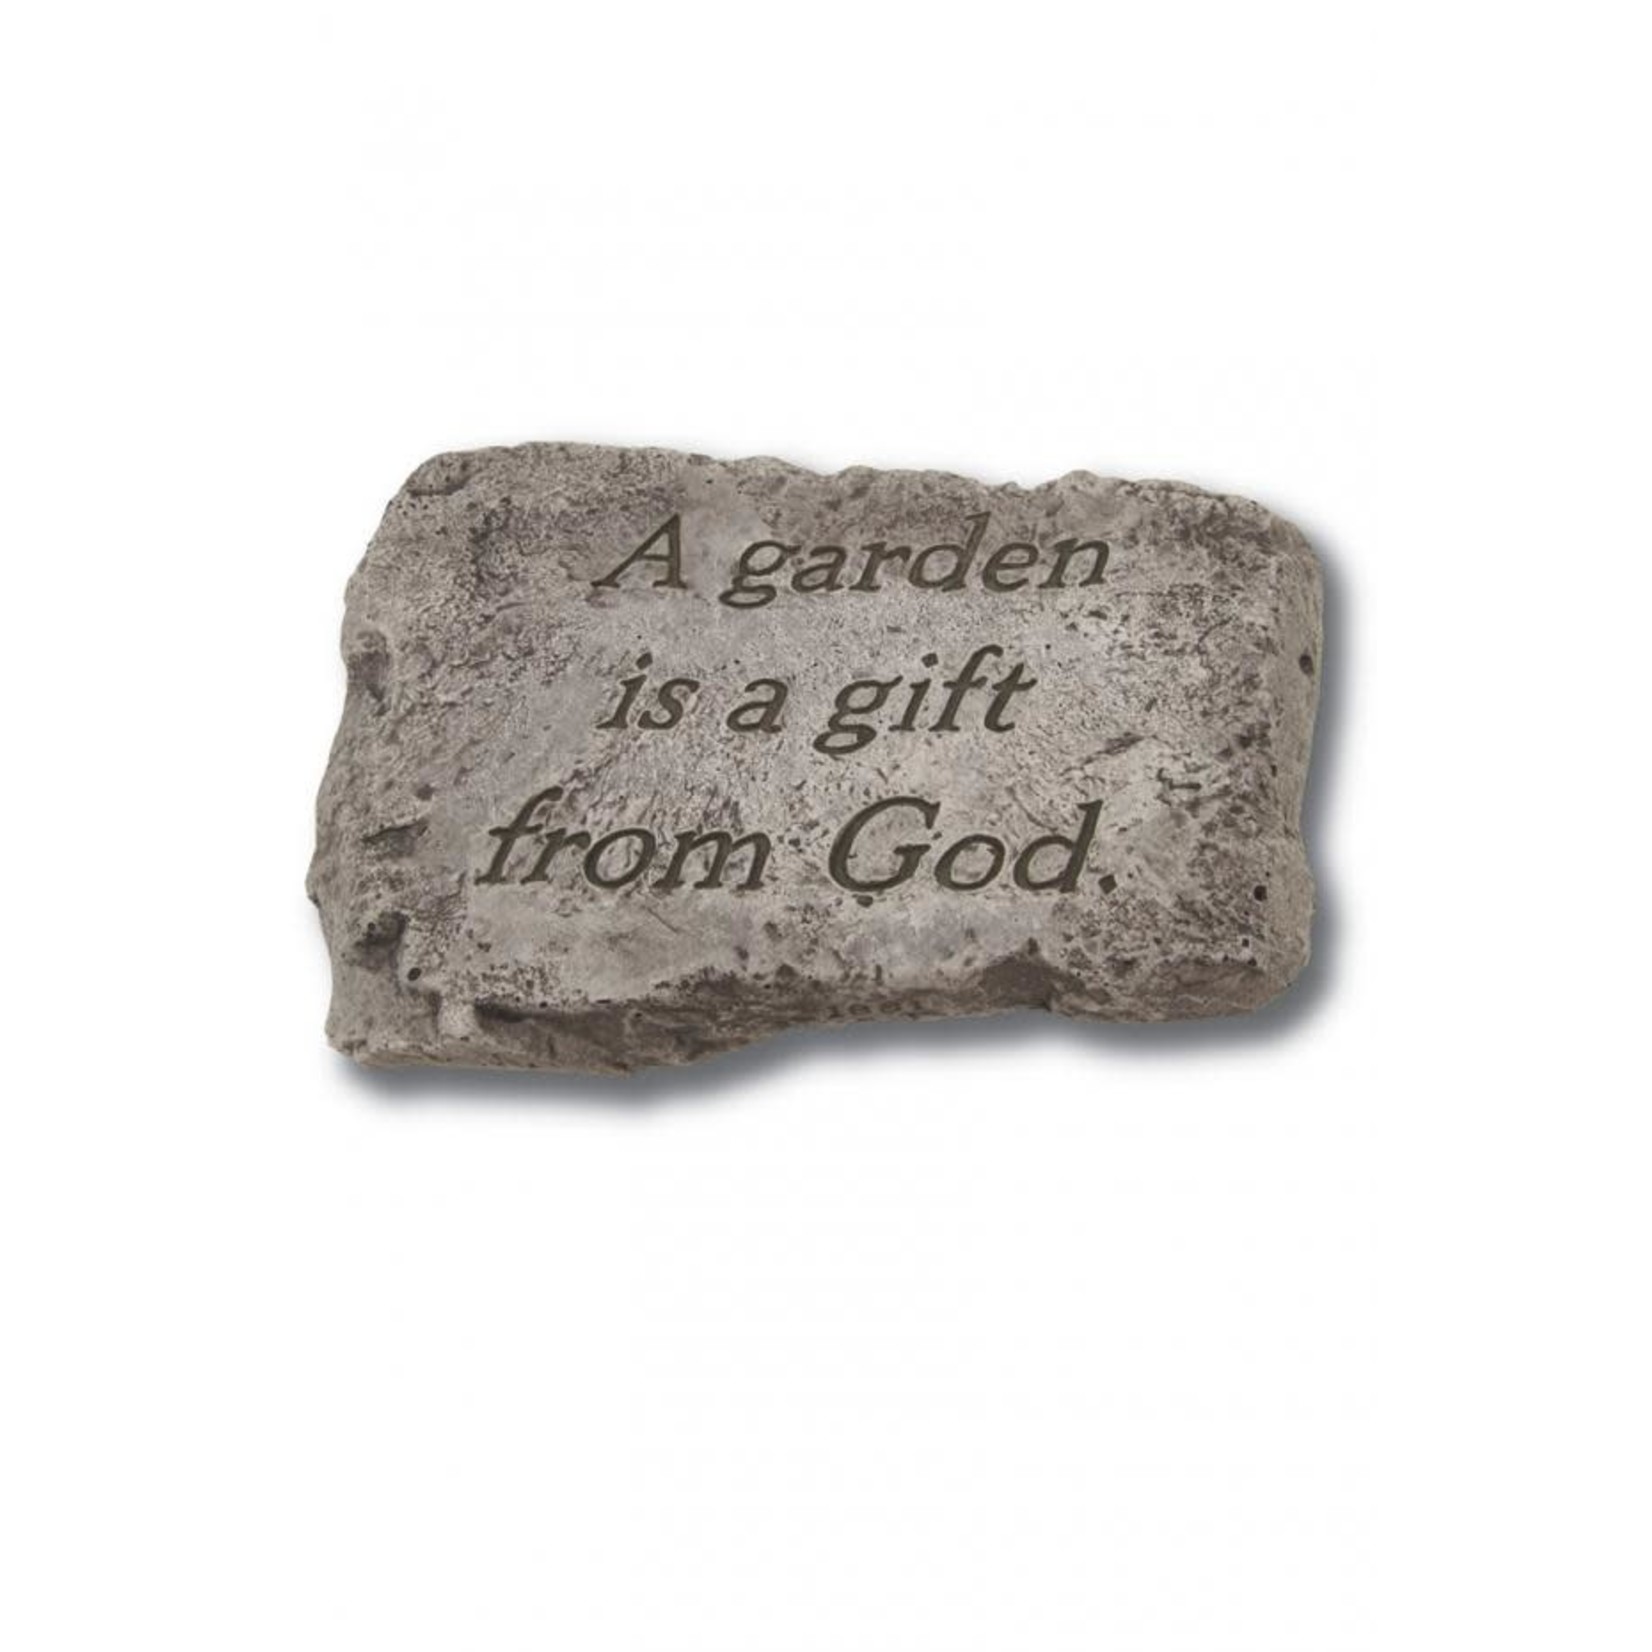 STEPPING STONE 10IN - A GARDEN IS A GIFT FROM GOD